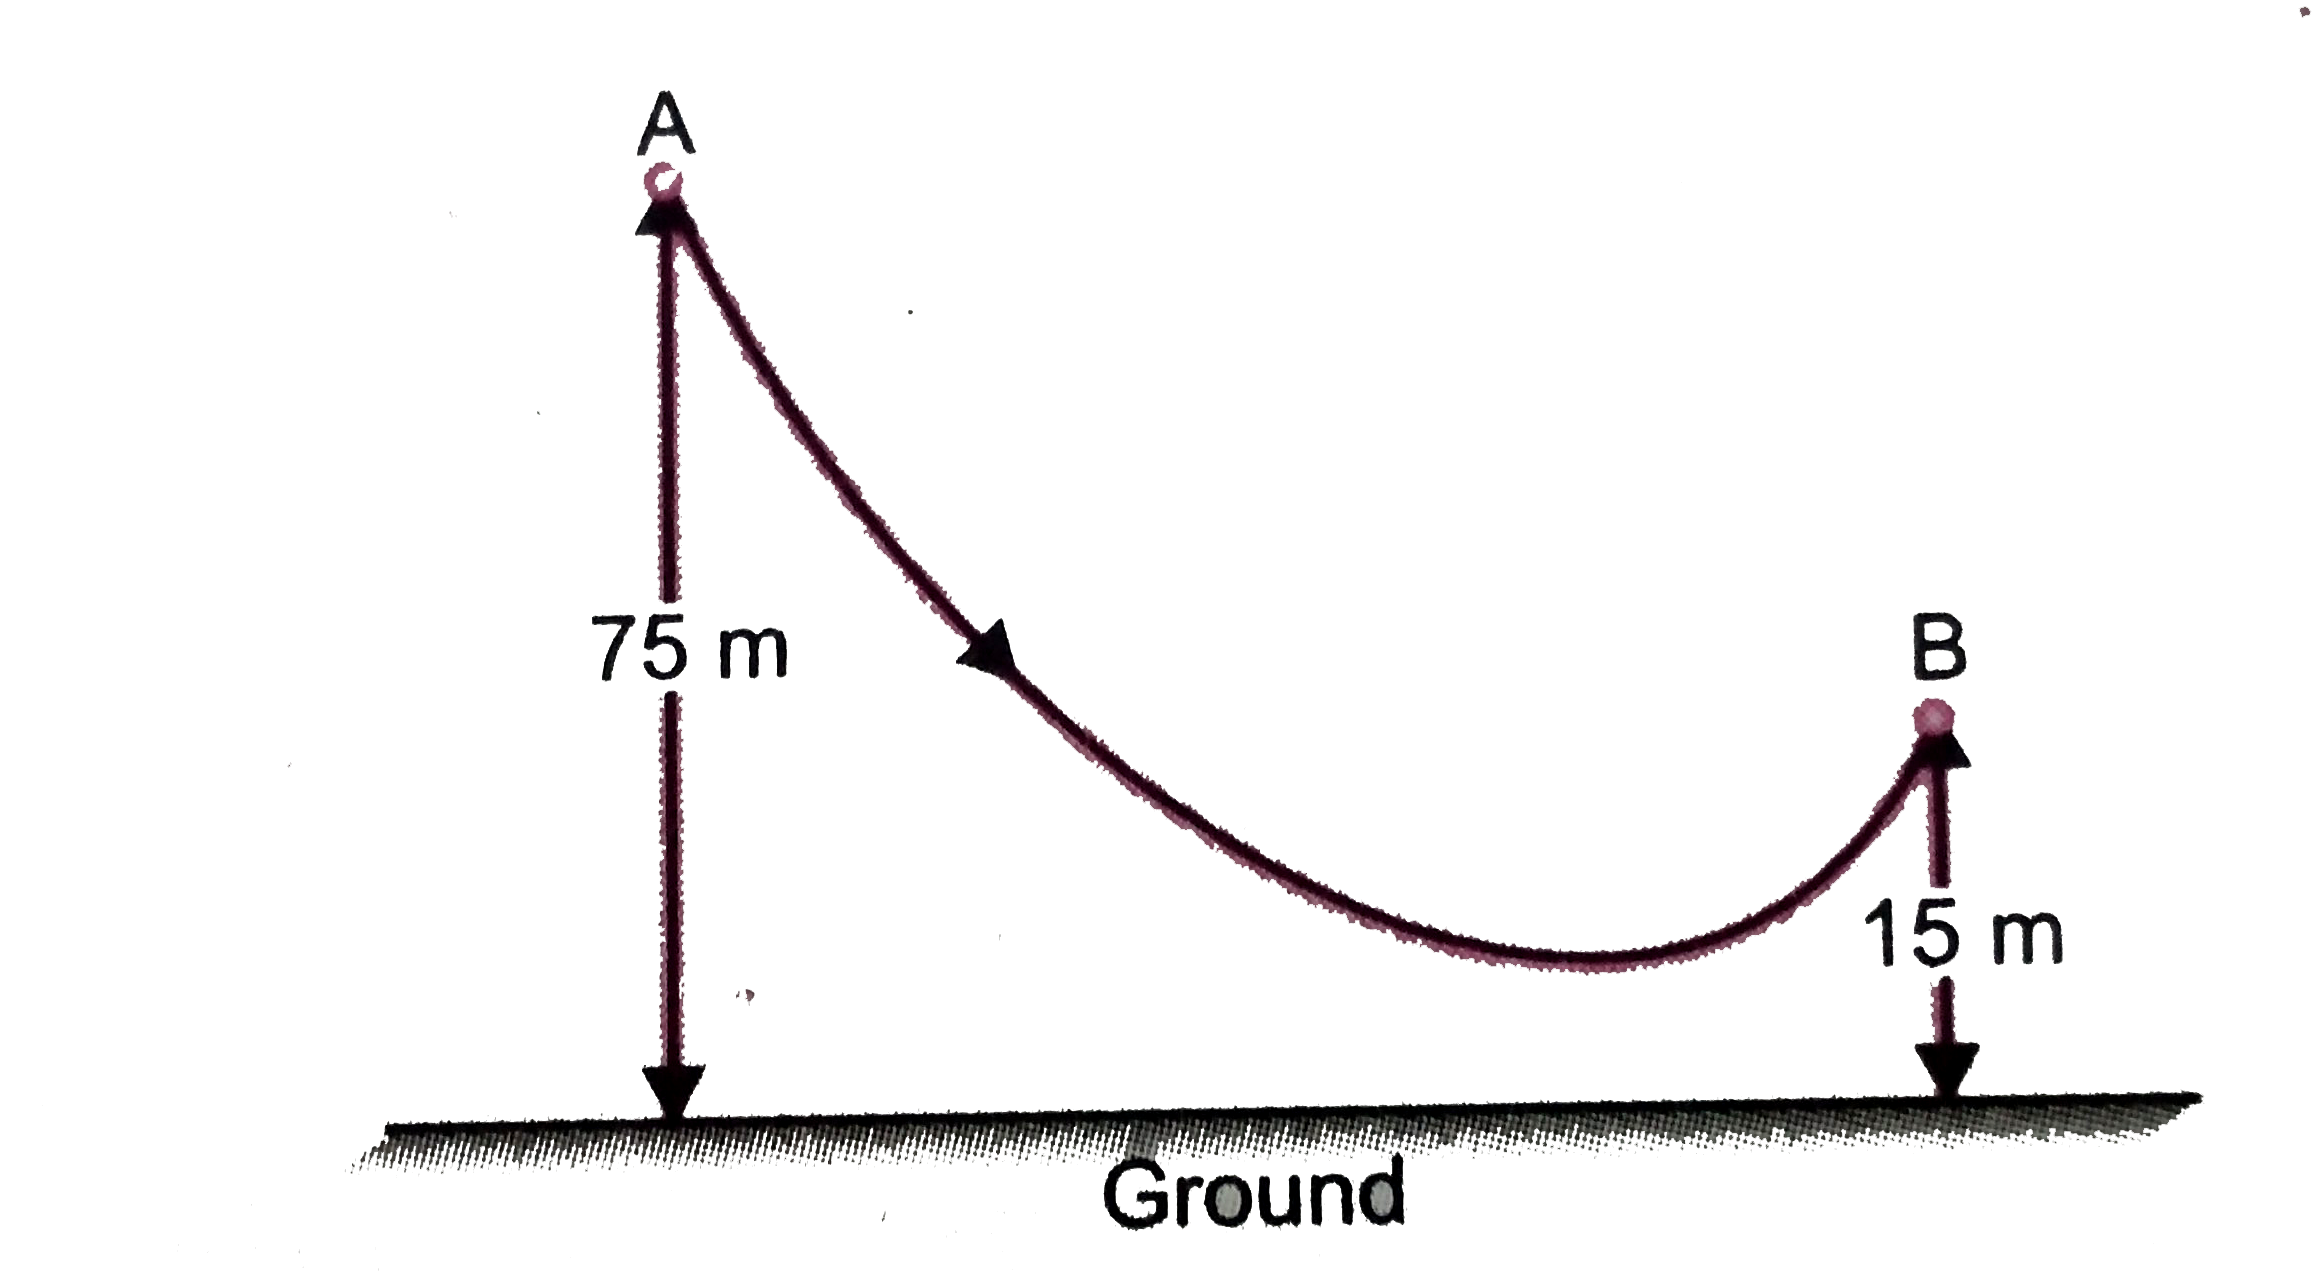 The diagram shows a ski jump. A skier weighing 60kg f stands at A. He